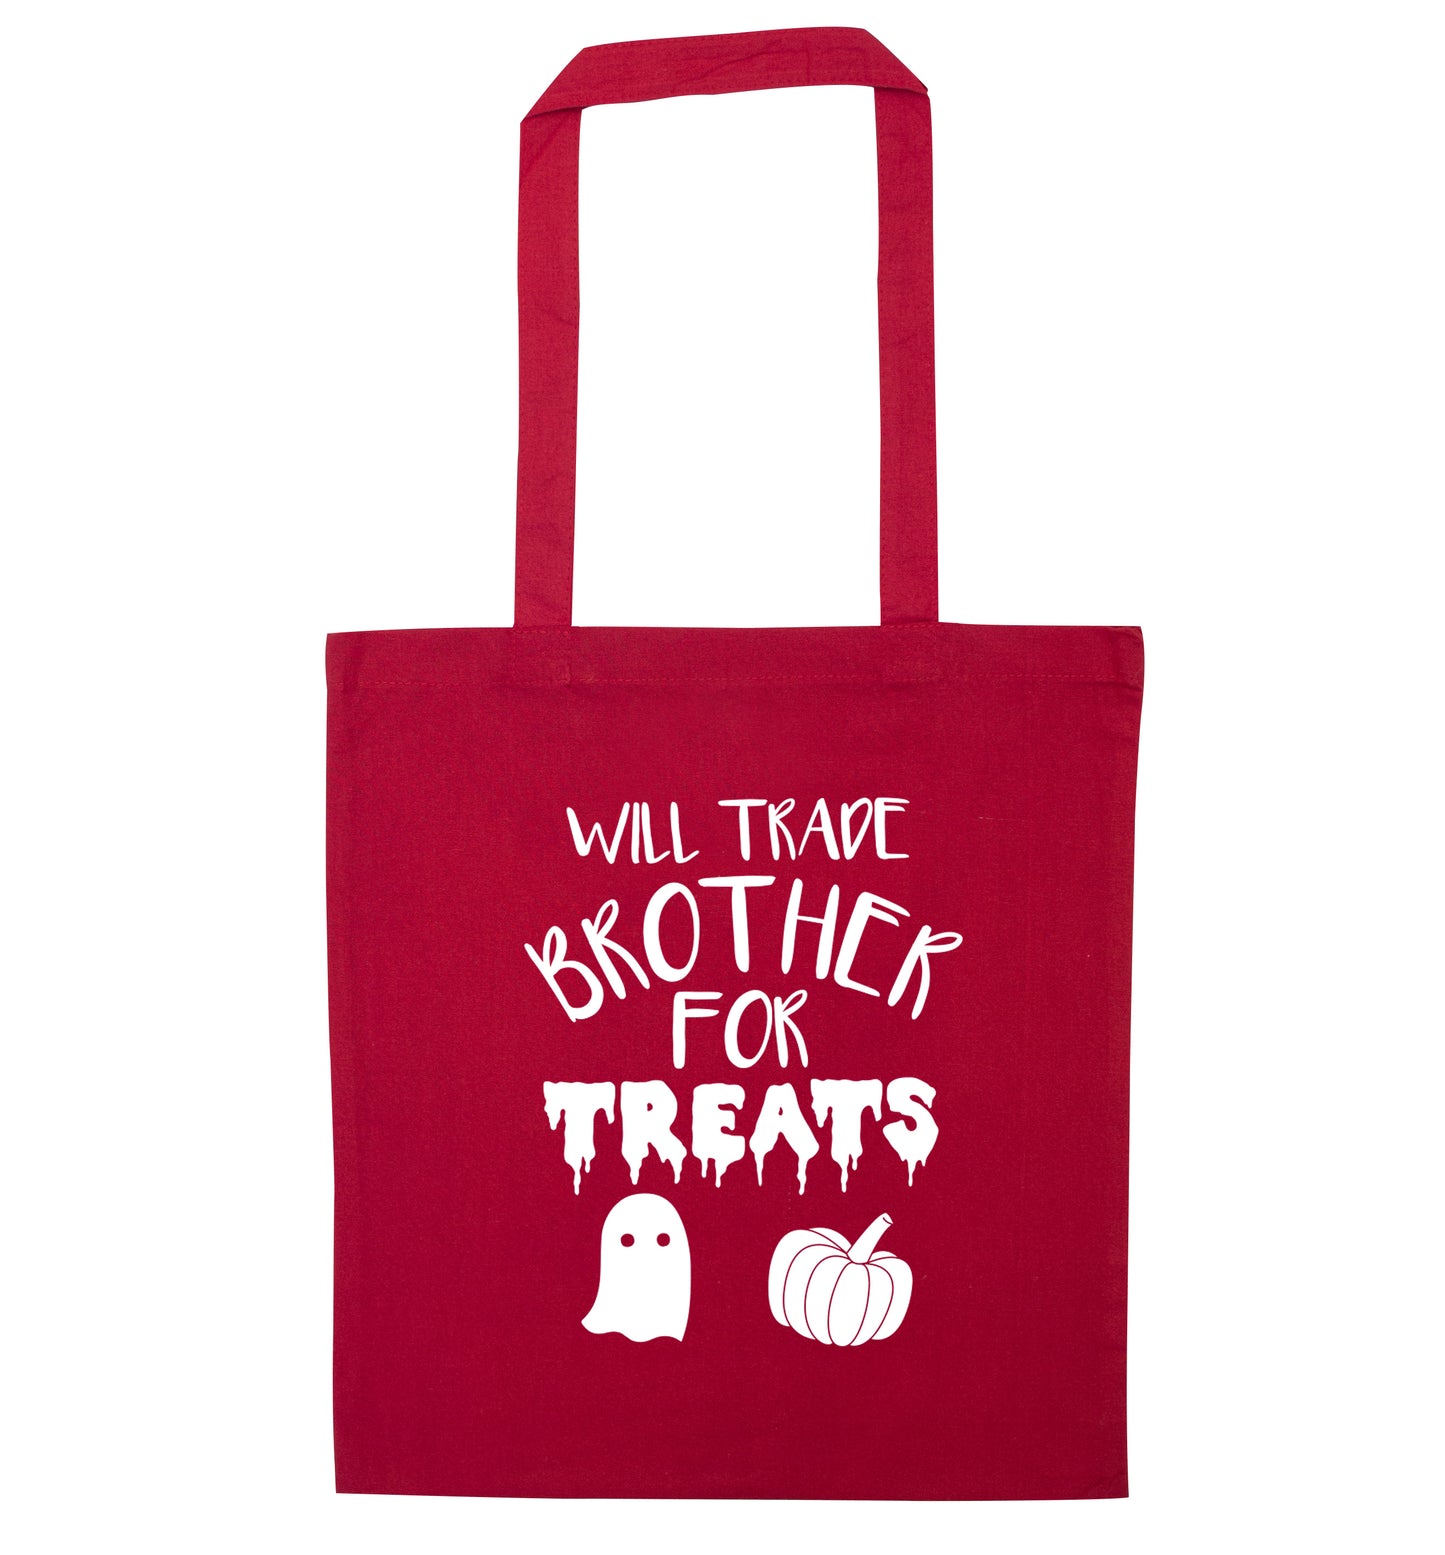 Will trade brother for sweets red tote bag